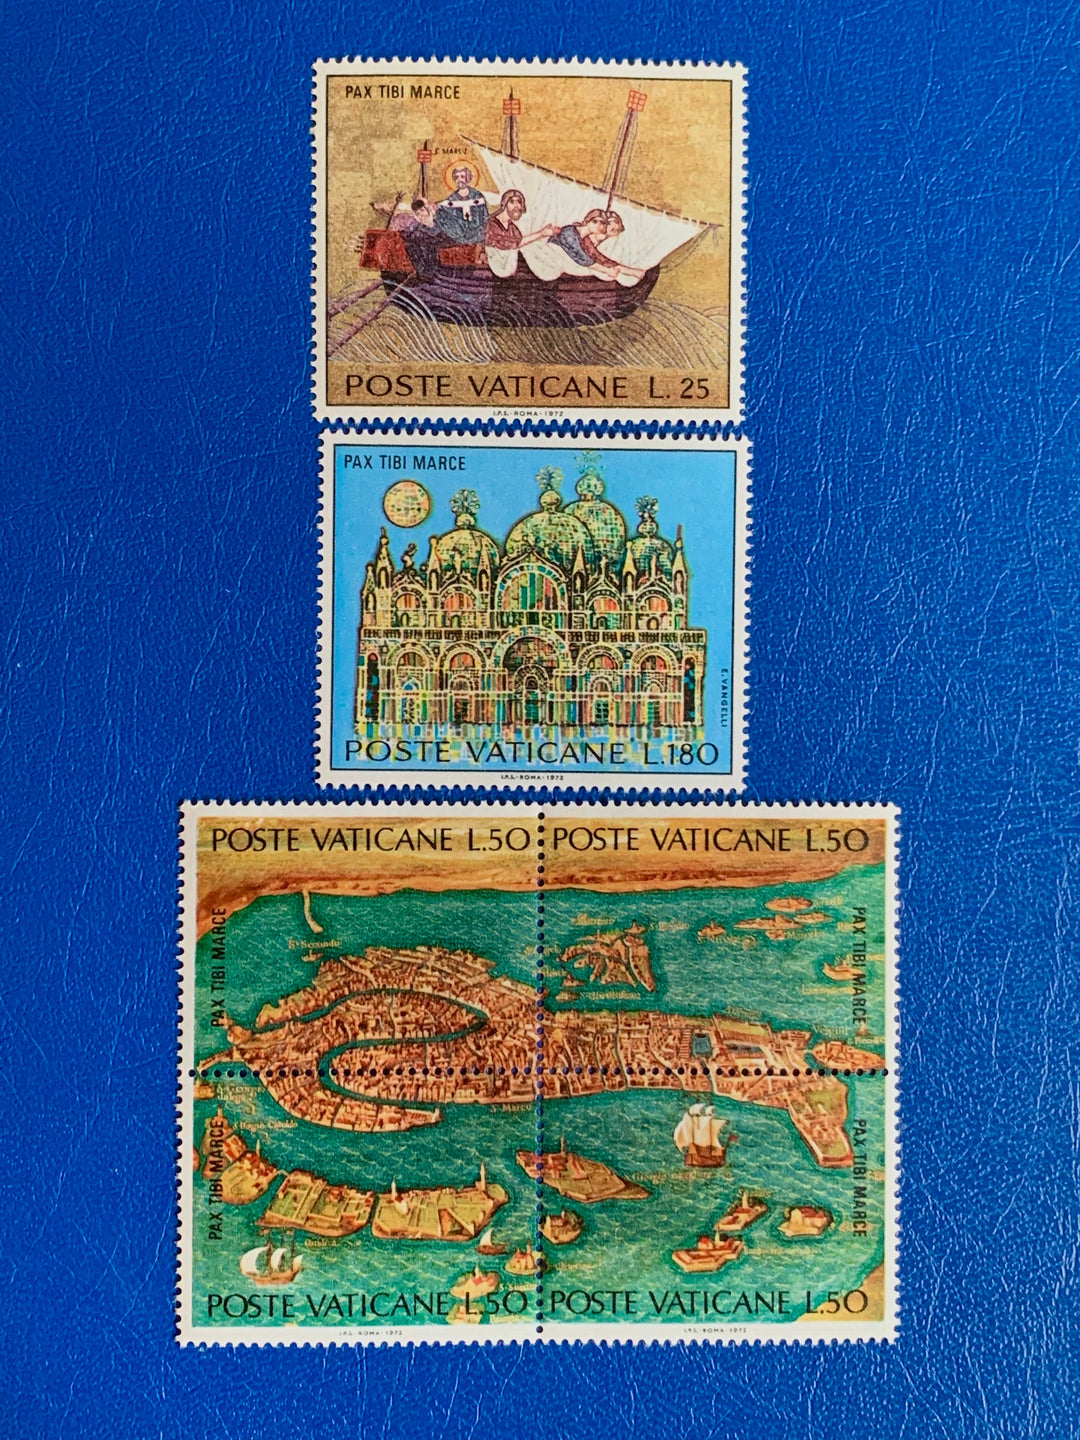 Vatican - Original Vintage Postage Stamps- 1972 - Venice - for the collector, artist or crafter